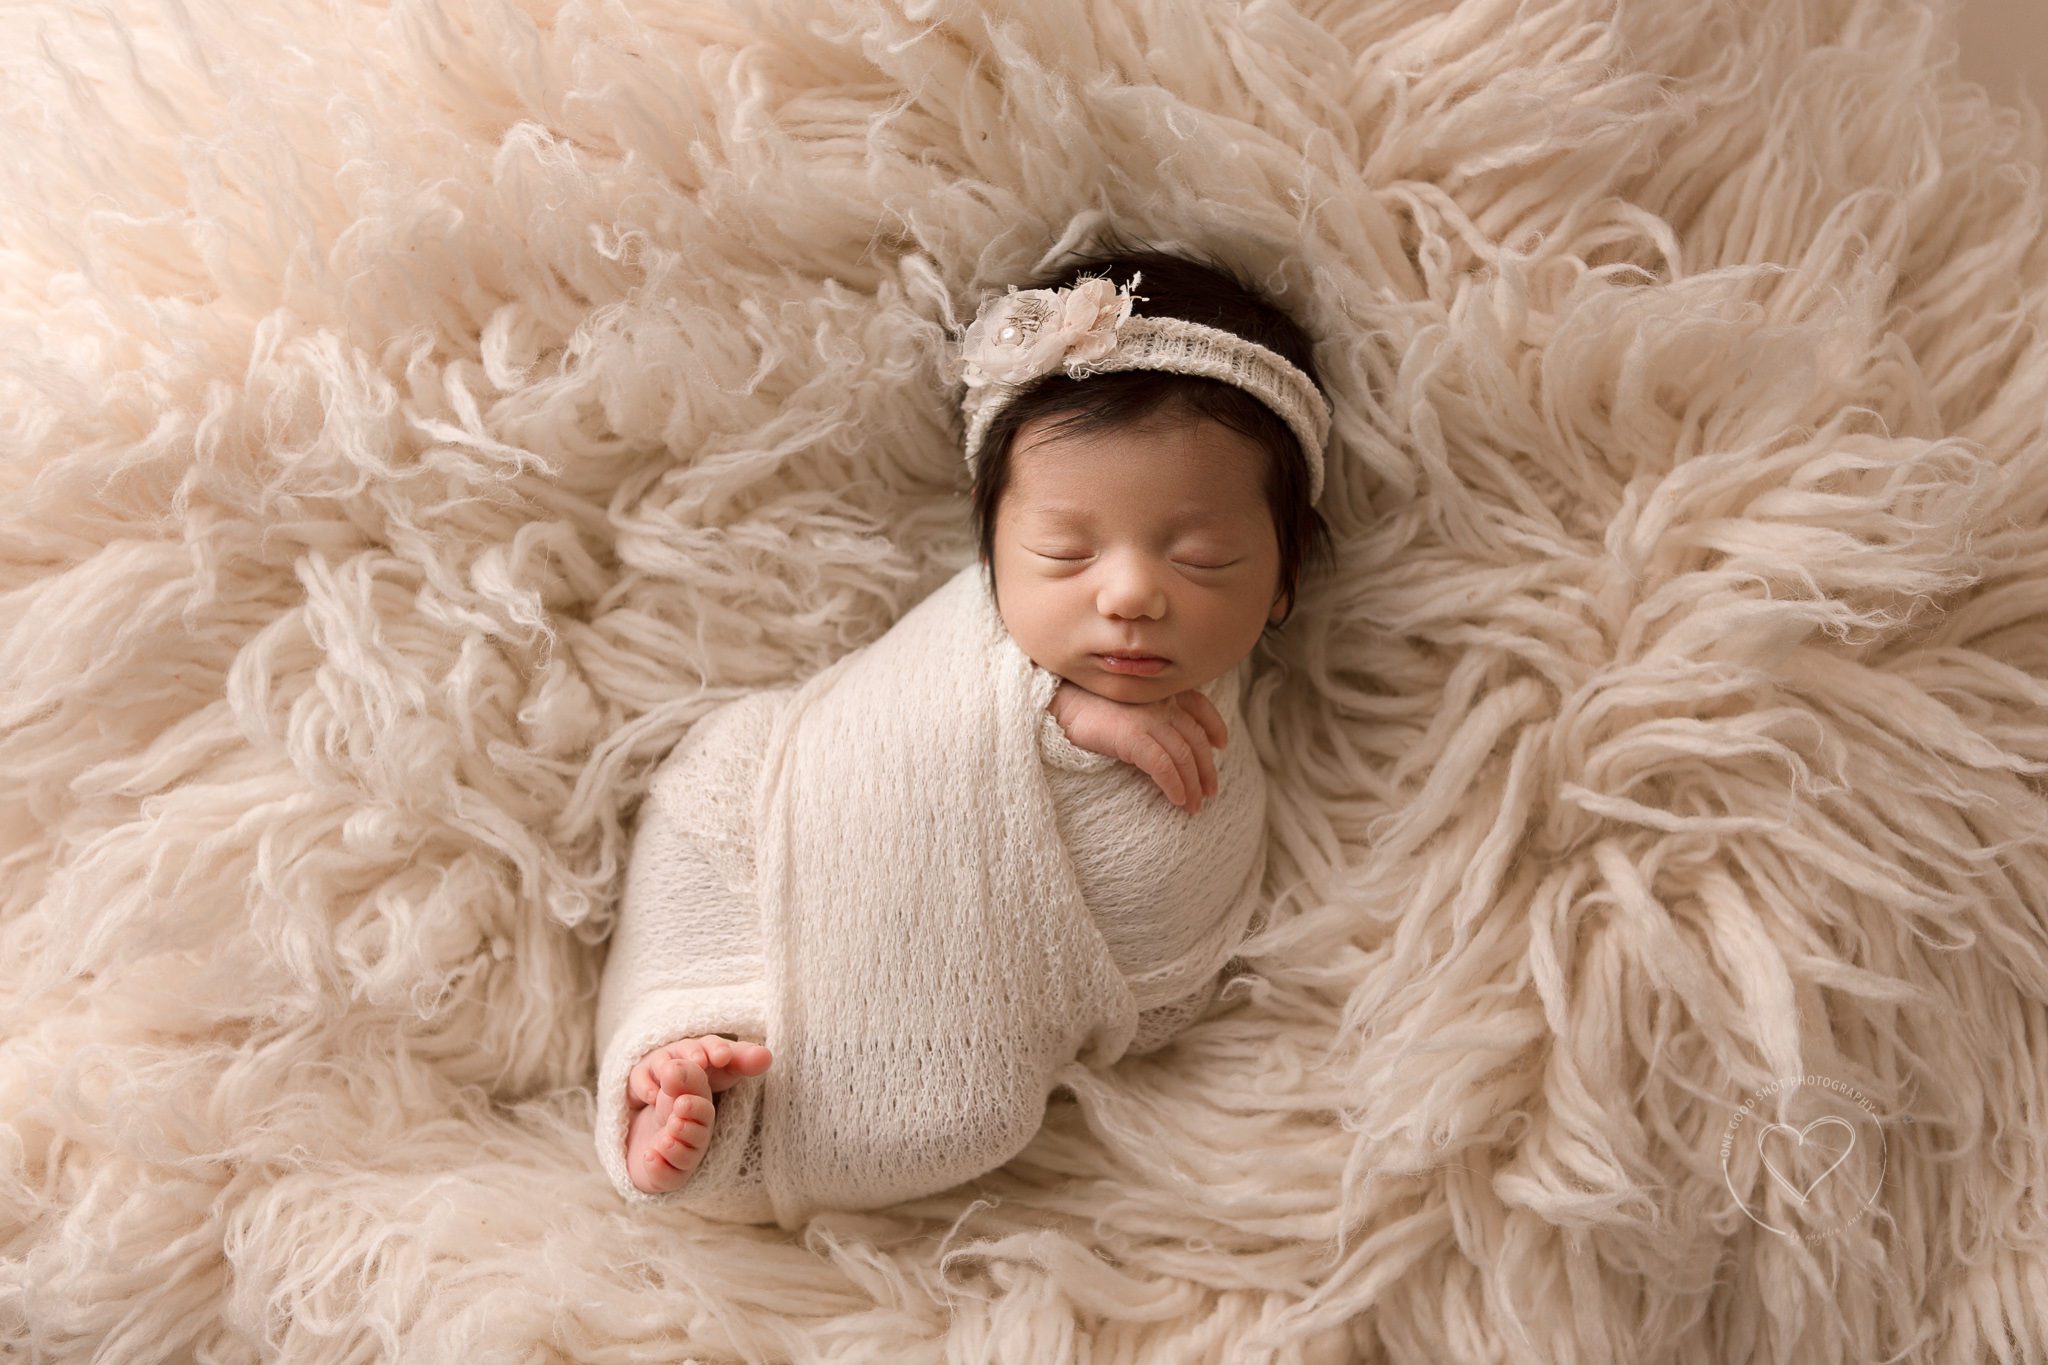 Fresno newborn baby girl photo, wrapped in cream, hands and get showing, wearing floral headband, lying on flokati rug